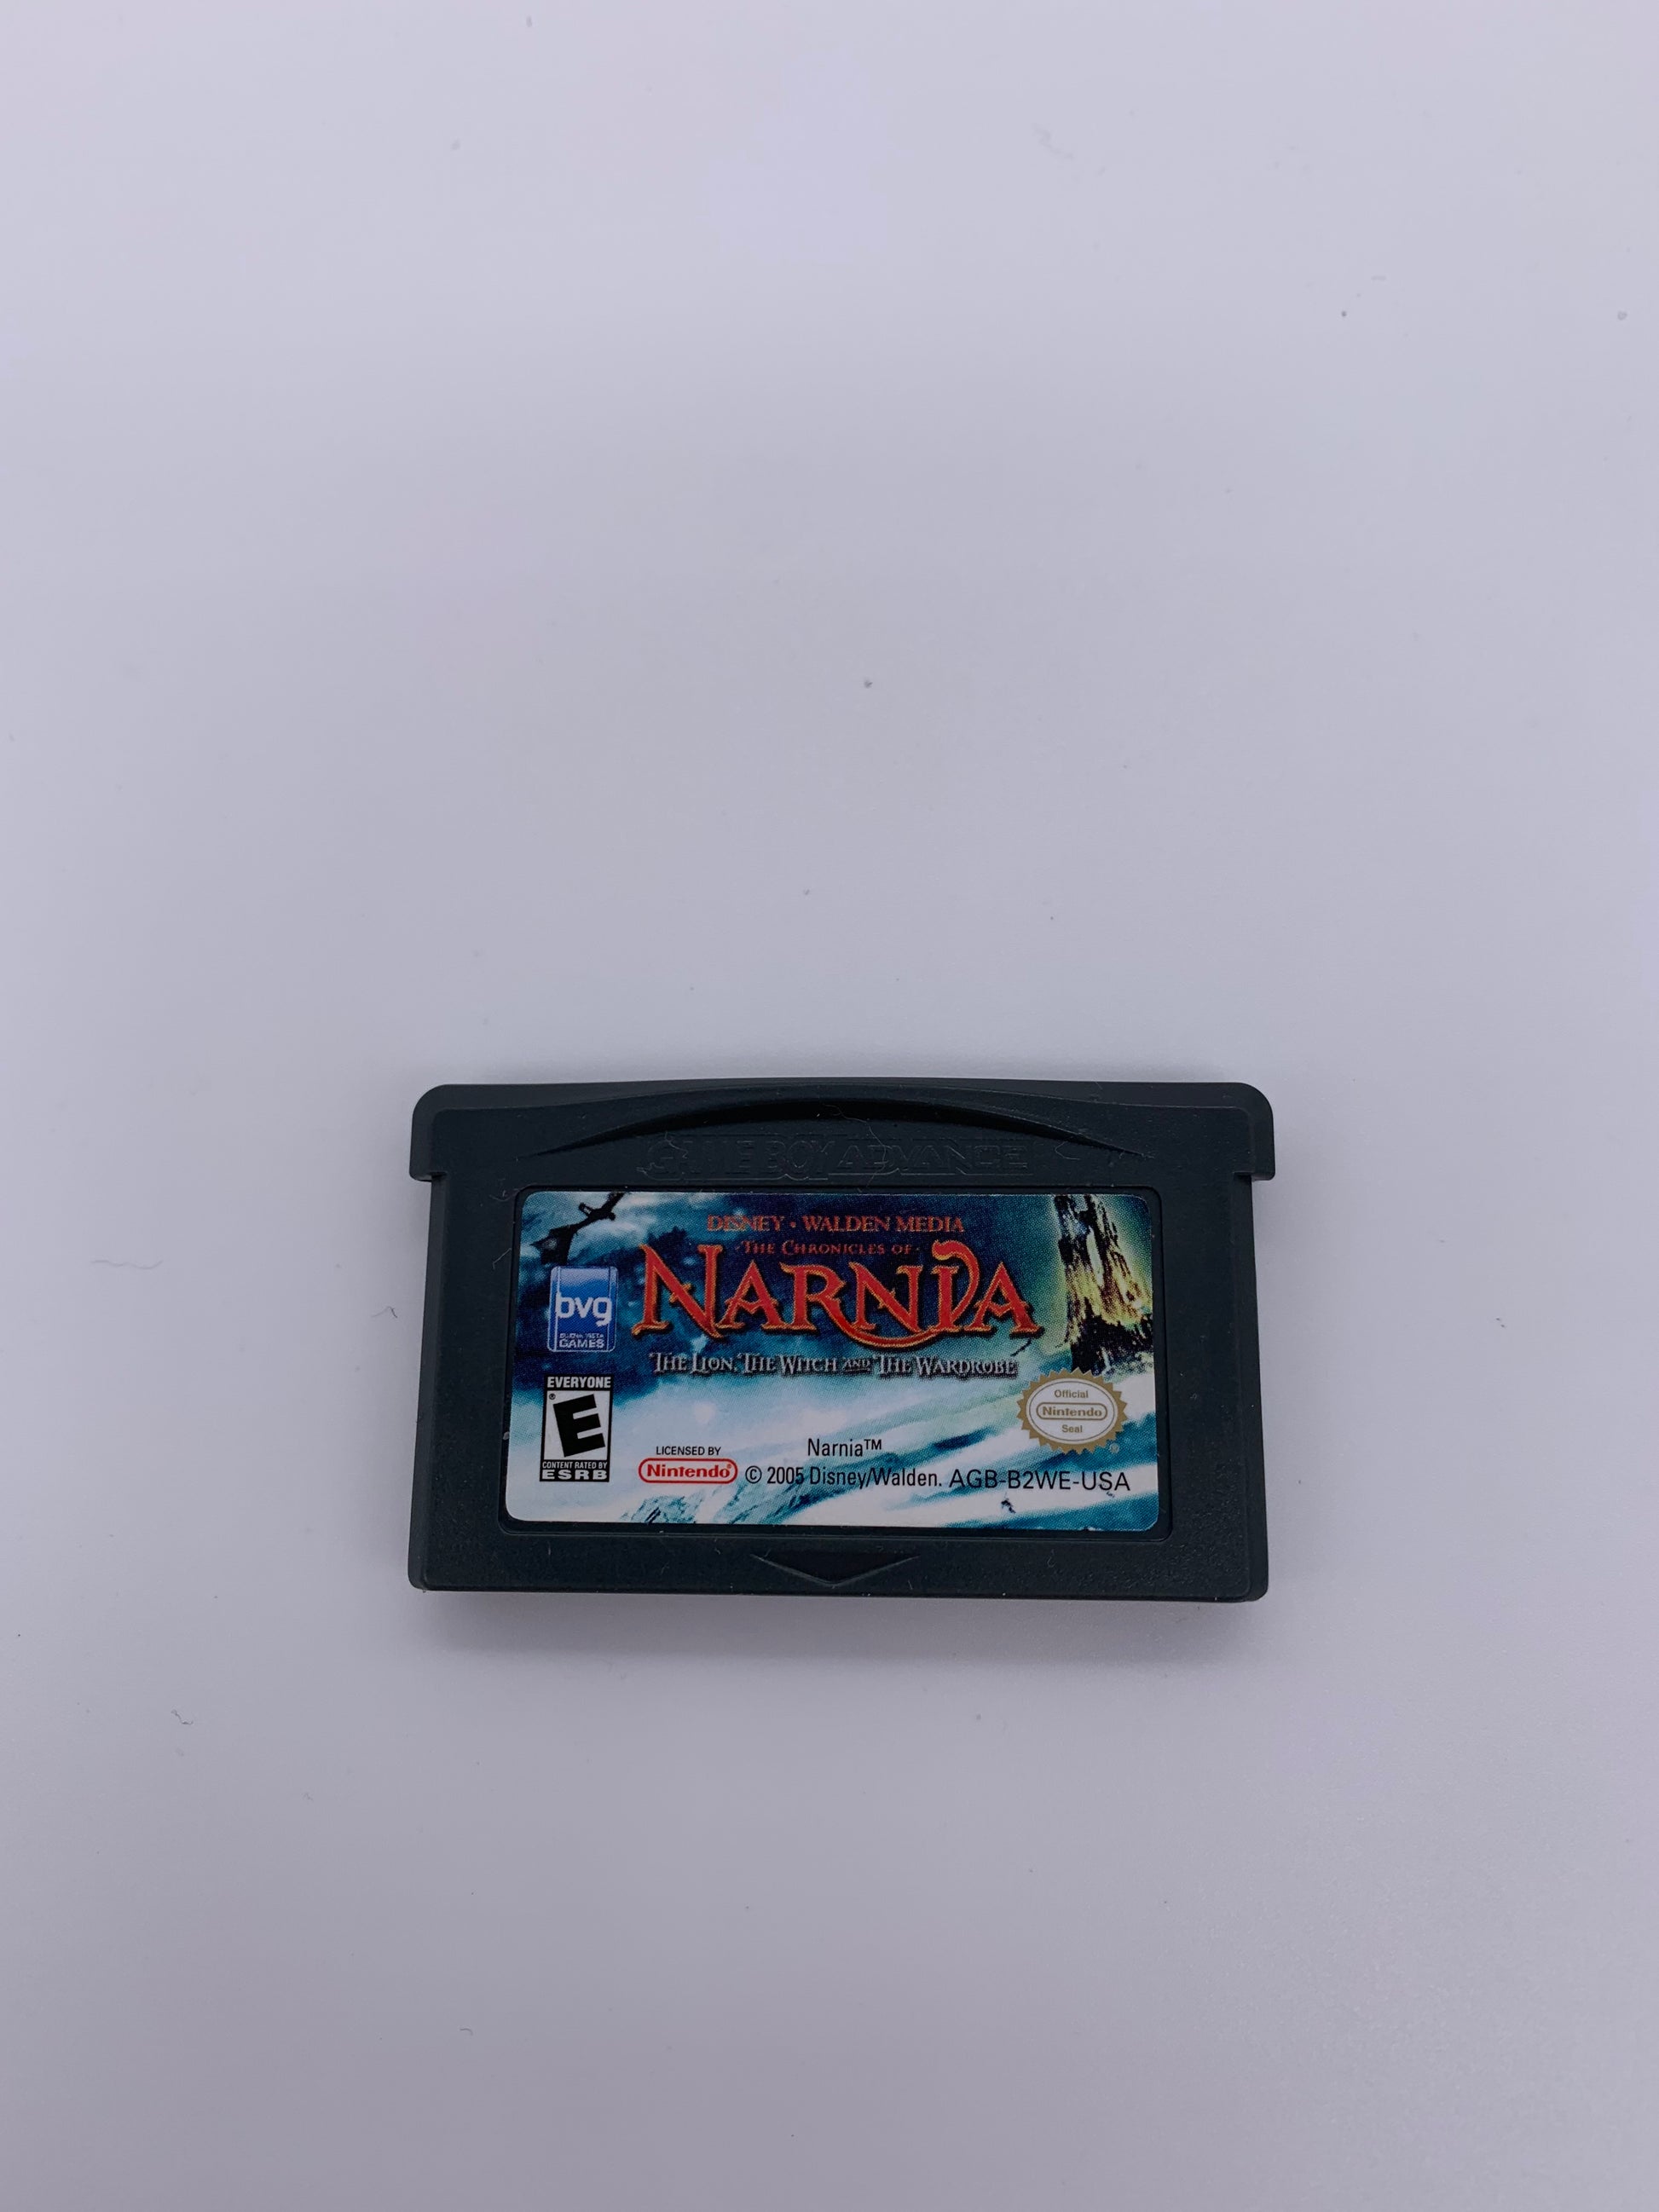 PiXEL-RETRO.COM : GAME BOY ADVANCE (GBA) GAME NTSC THE CHRONICLES OF NARNIA THE LION, THE WITCH AND THE WARDROBE